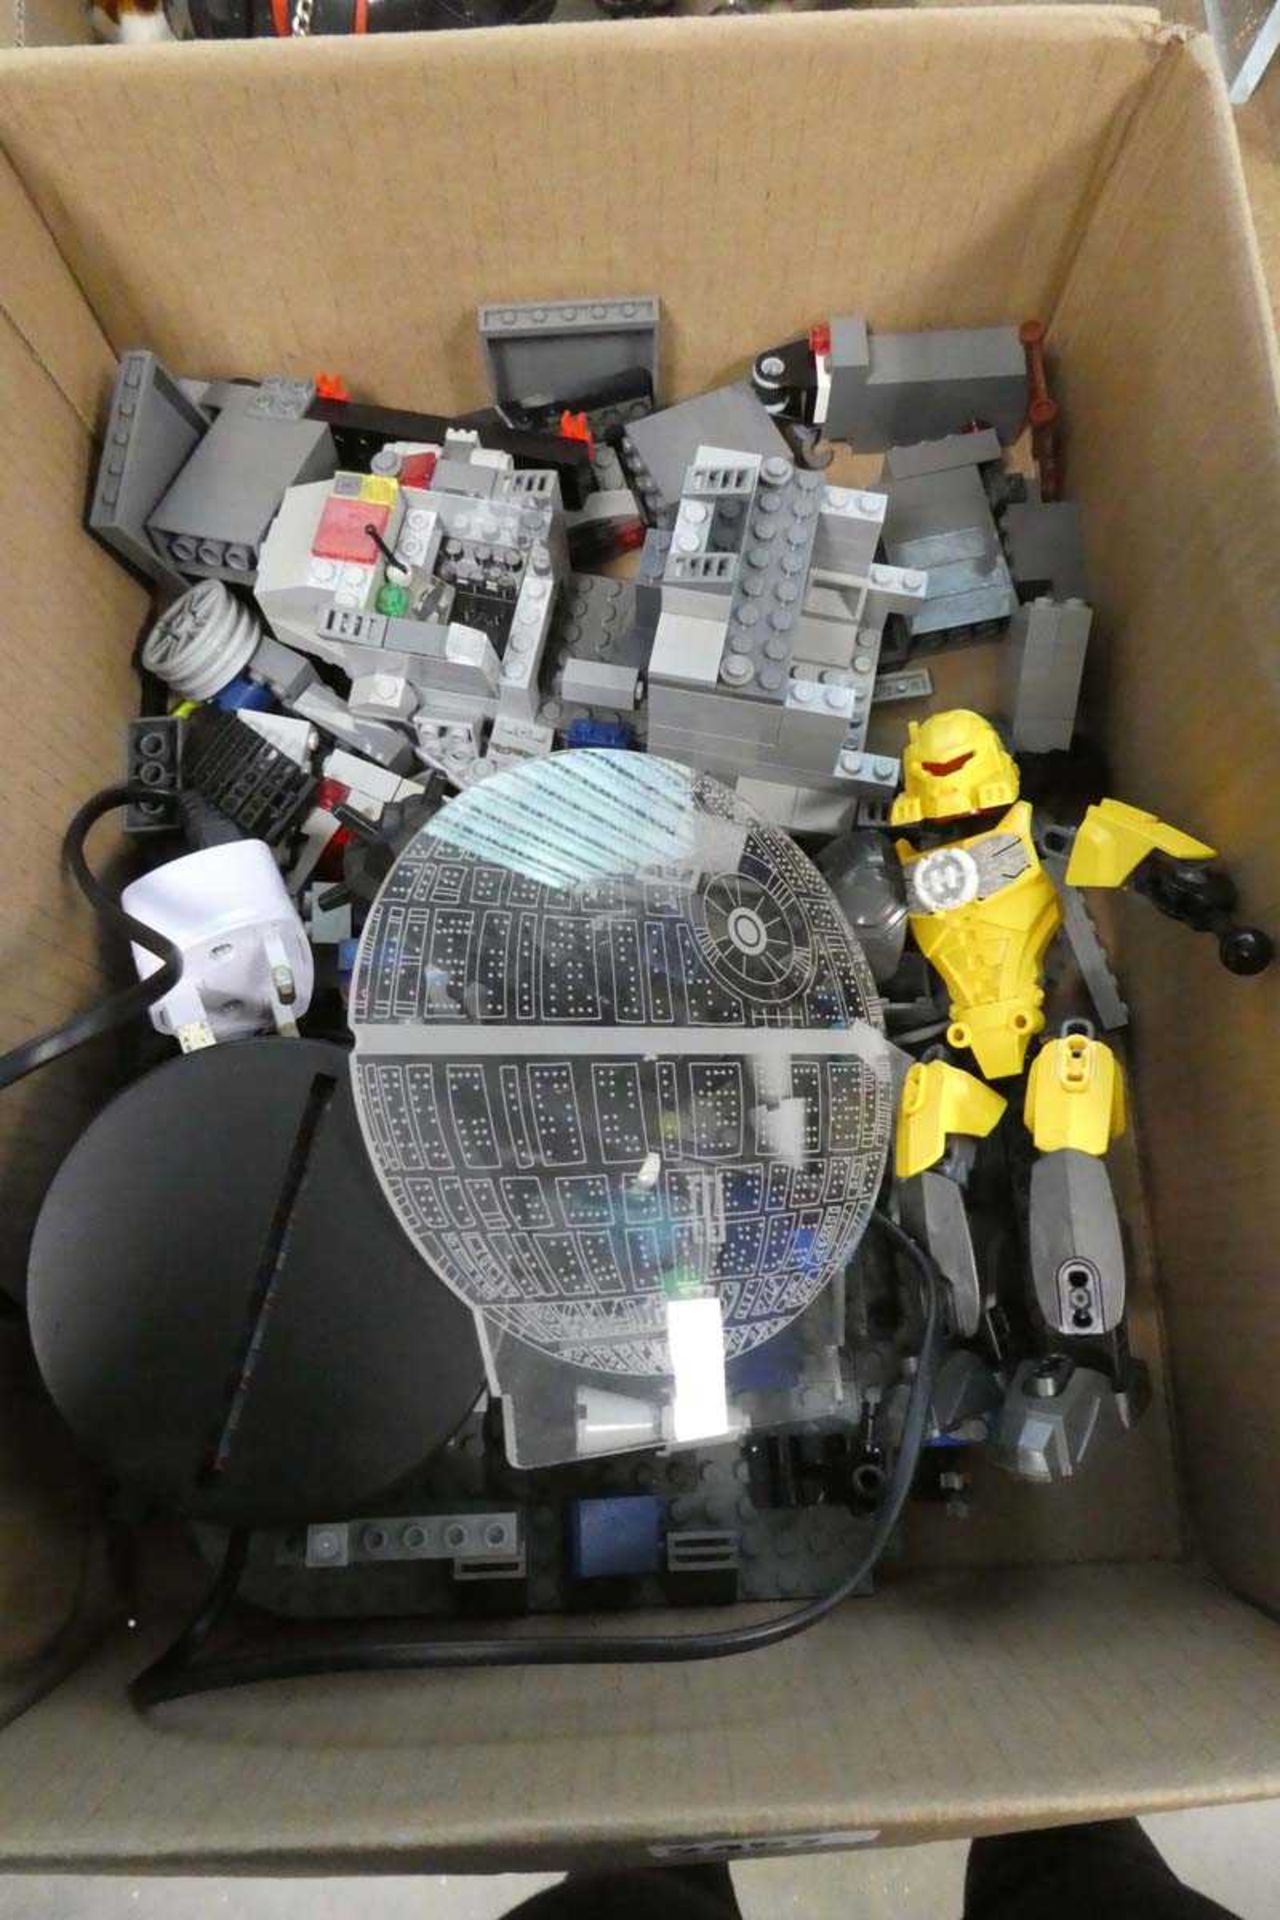 Tray containing various Lego component pieces in grey/black and Lego figure